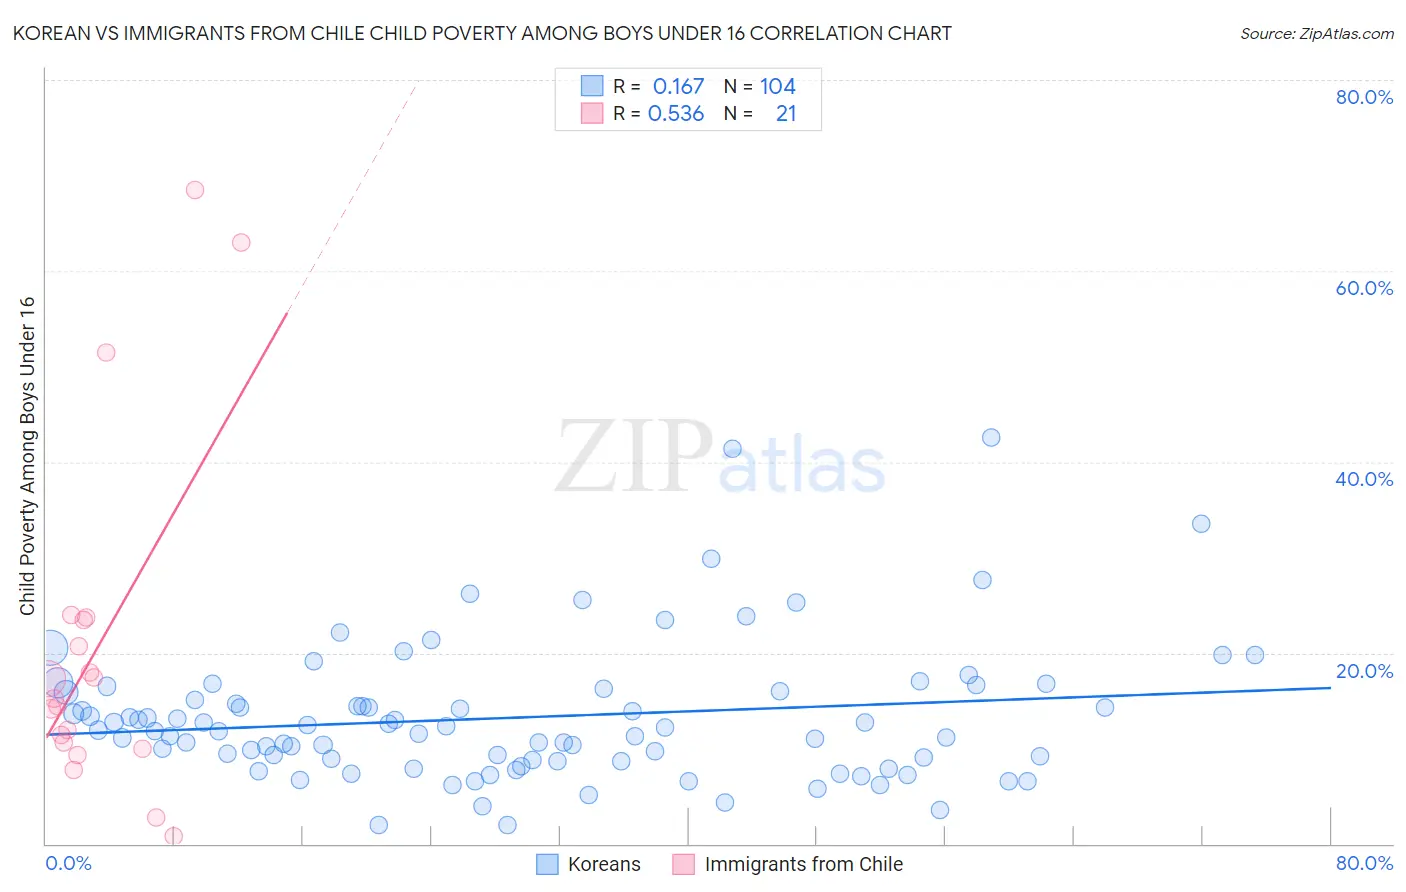 Korean vs Immigrants from Chile Child Poverty Among Boys Under 16